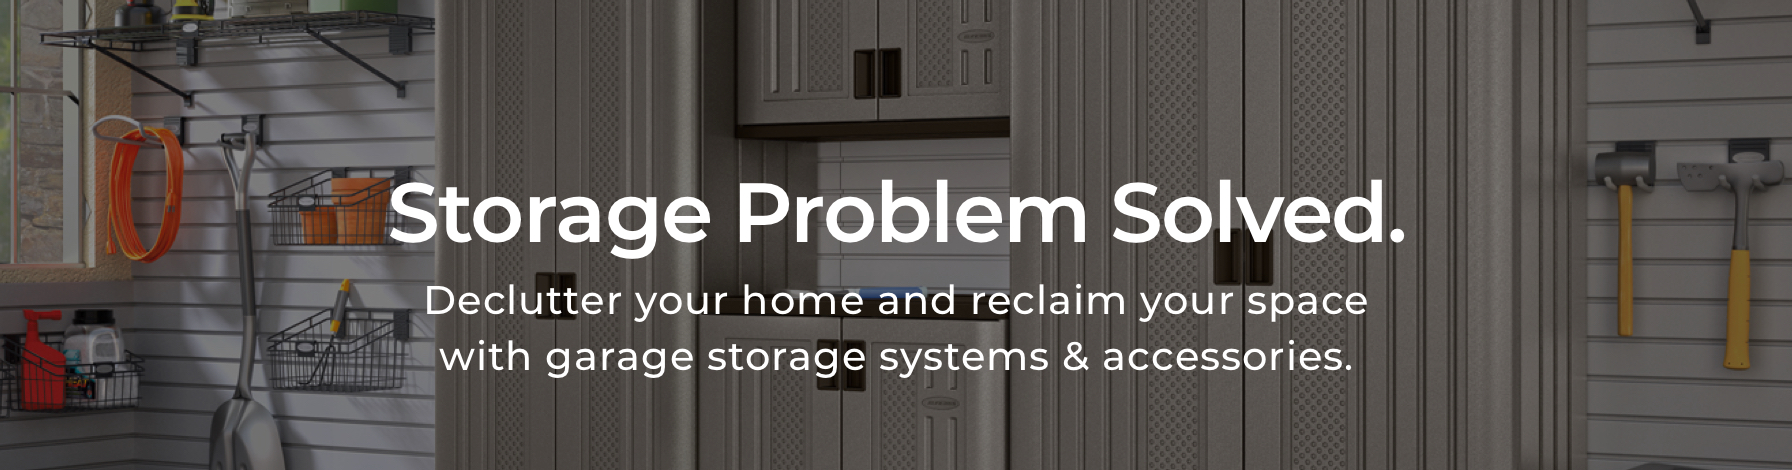 Storage problem solves. Declutter your home and reclaim your space with garage storage systems & accessories.